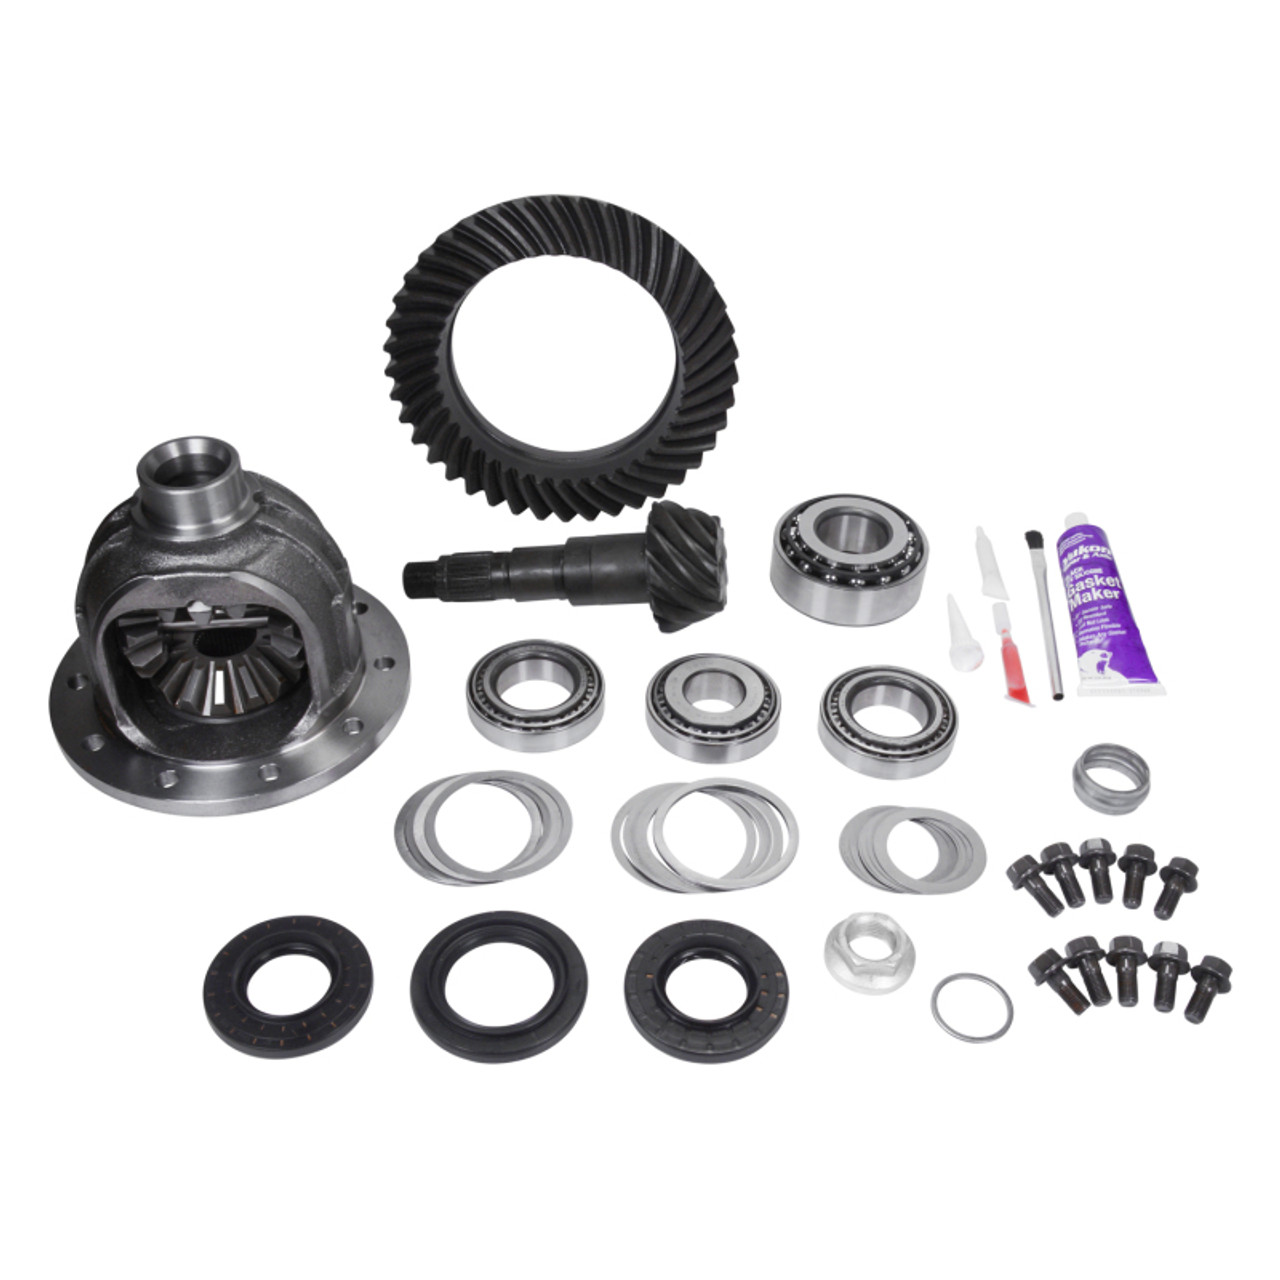 Yukon Gear High Performance Gear Set for Chrysler ZF 215mm Front Differential w/4.88 Ratio - YG C215R-488K Photo - Primary